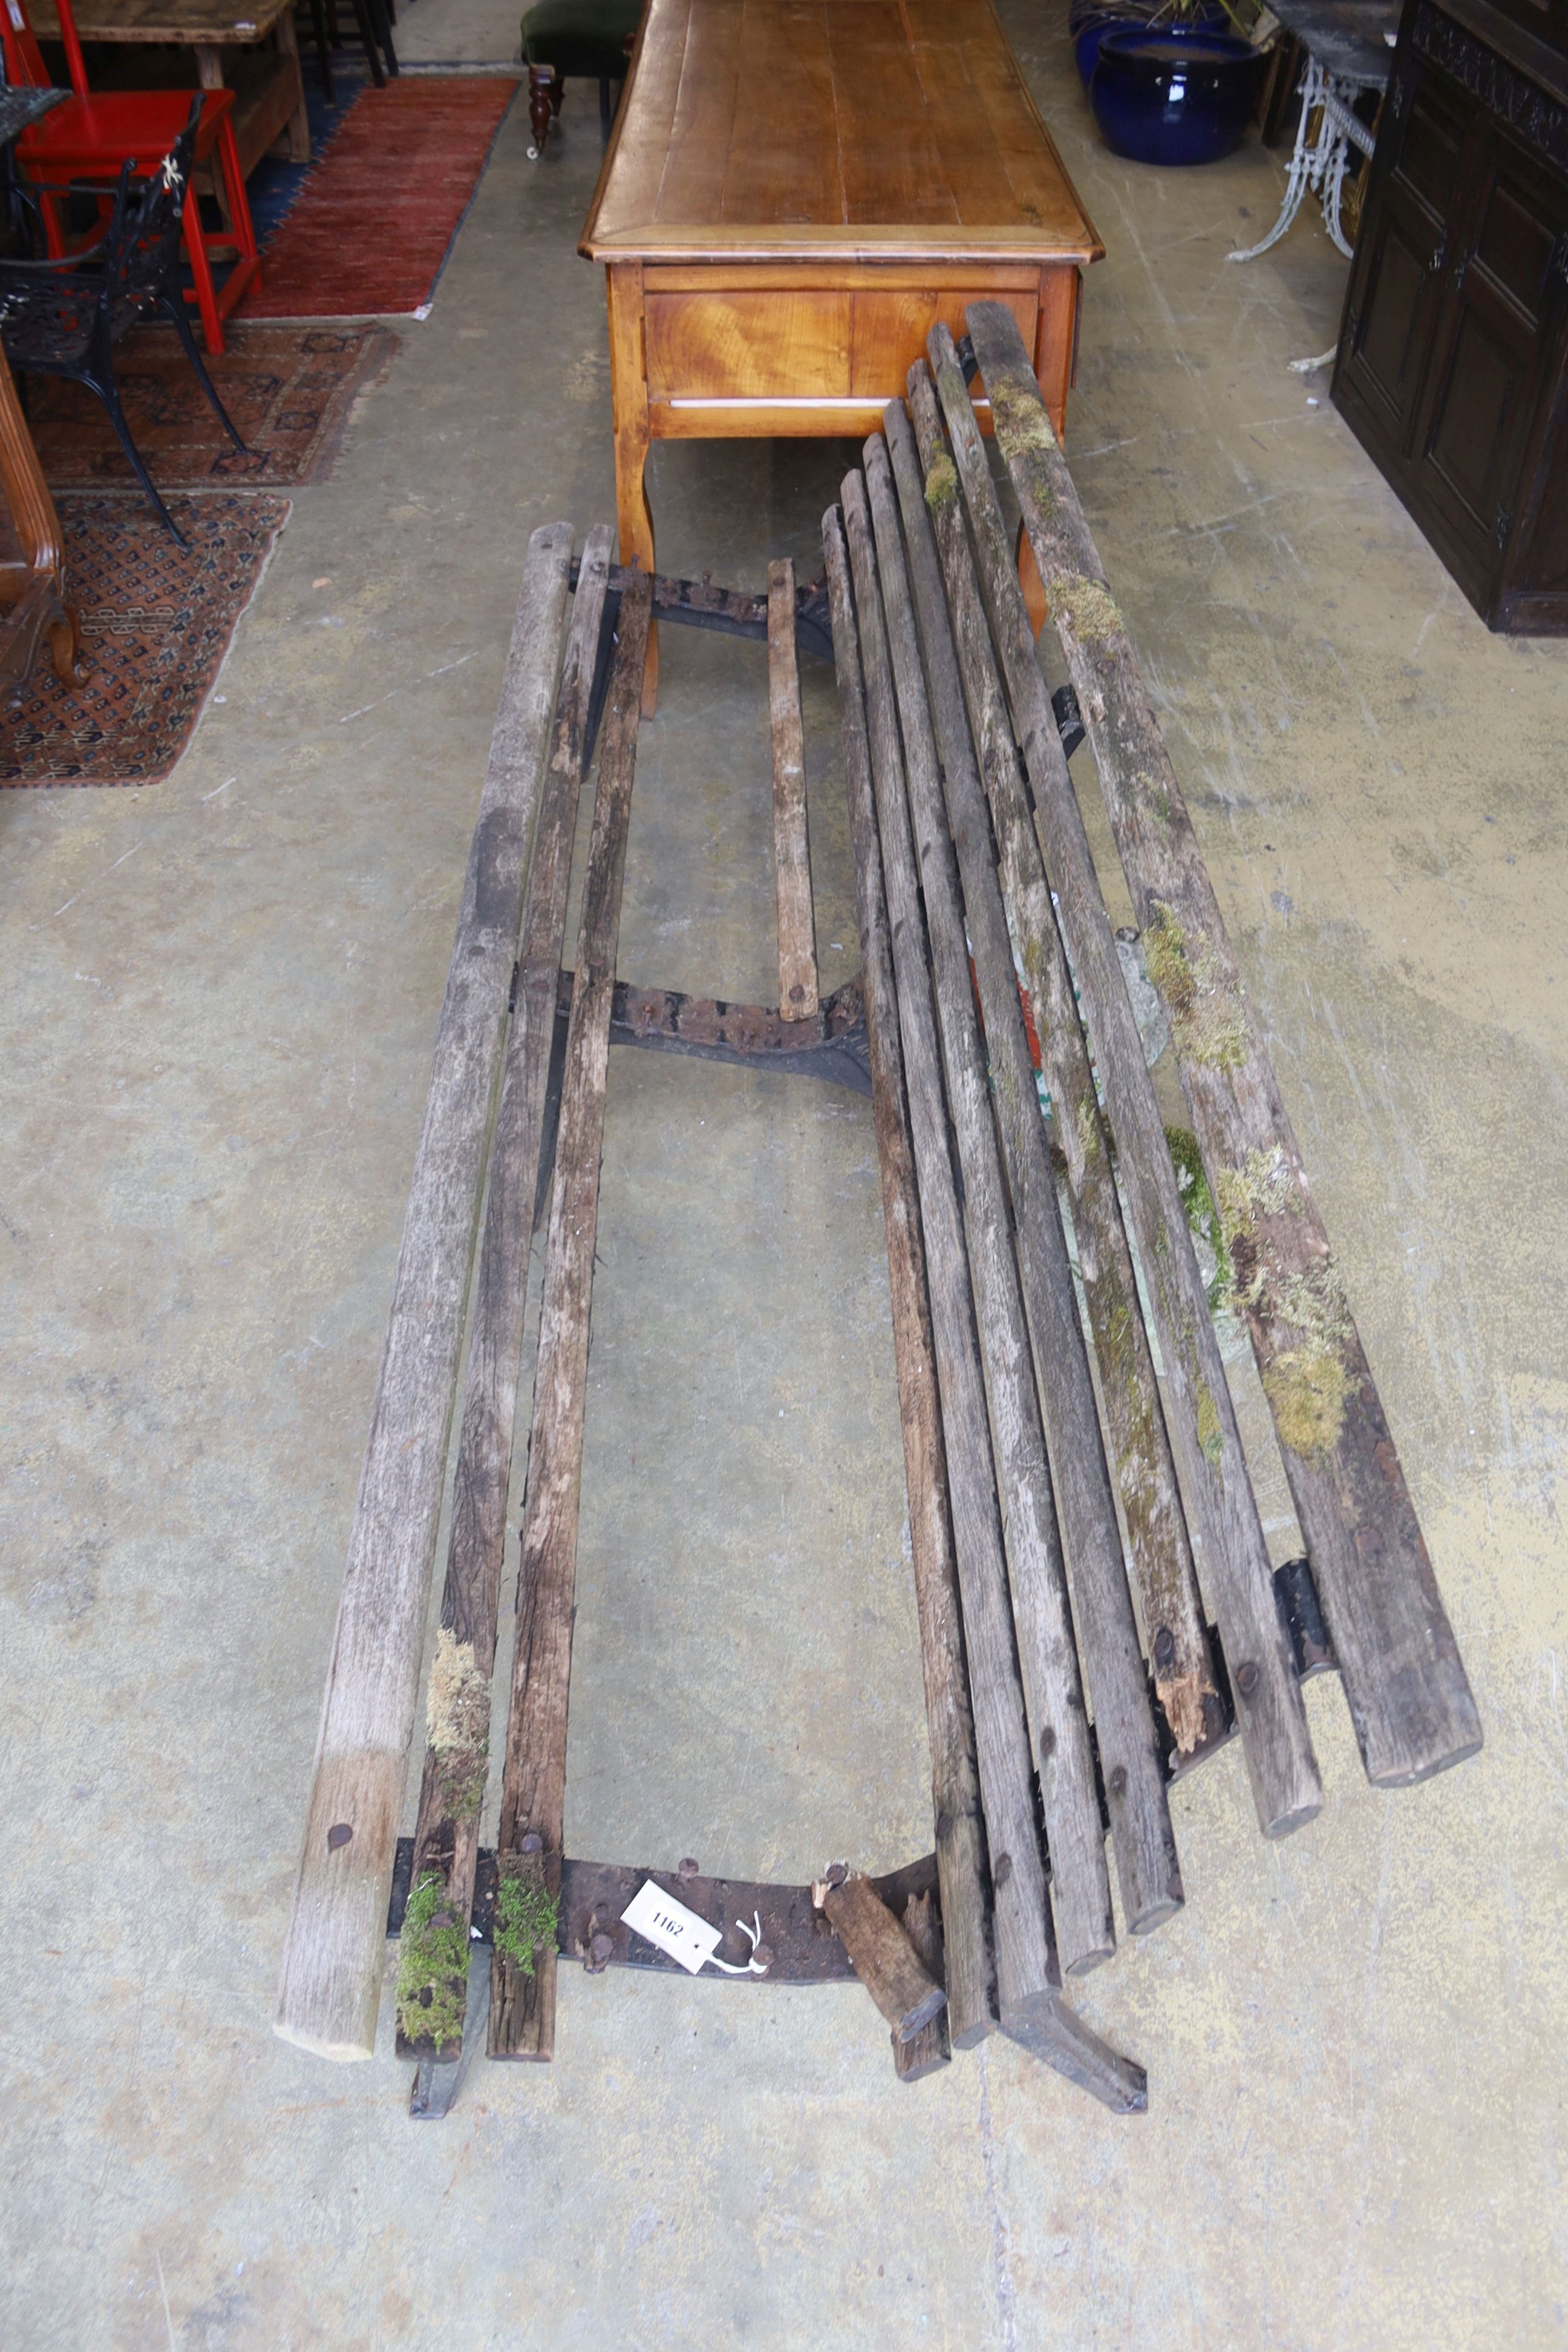 A slatted wood garden bench marked L M Furniture (in need of repair), length 244cm, depth 70cm, height 77cm